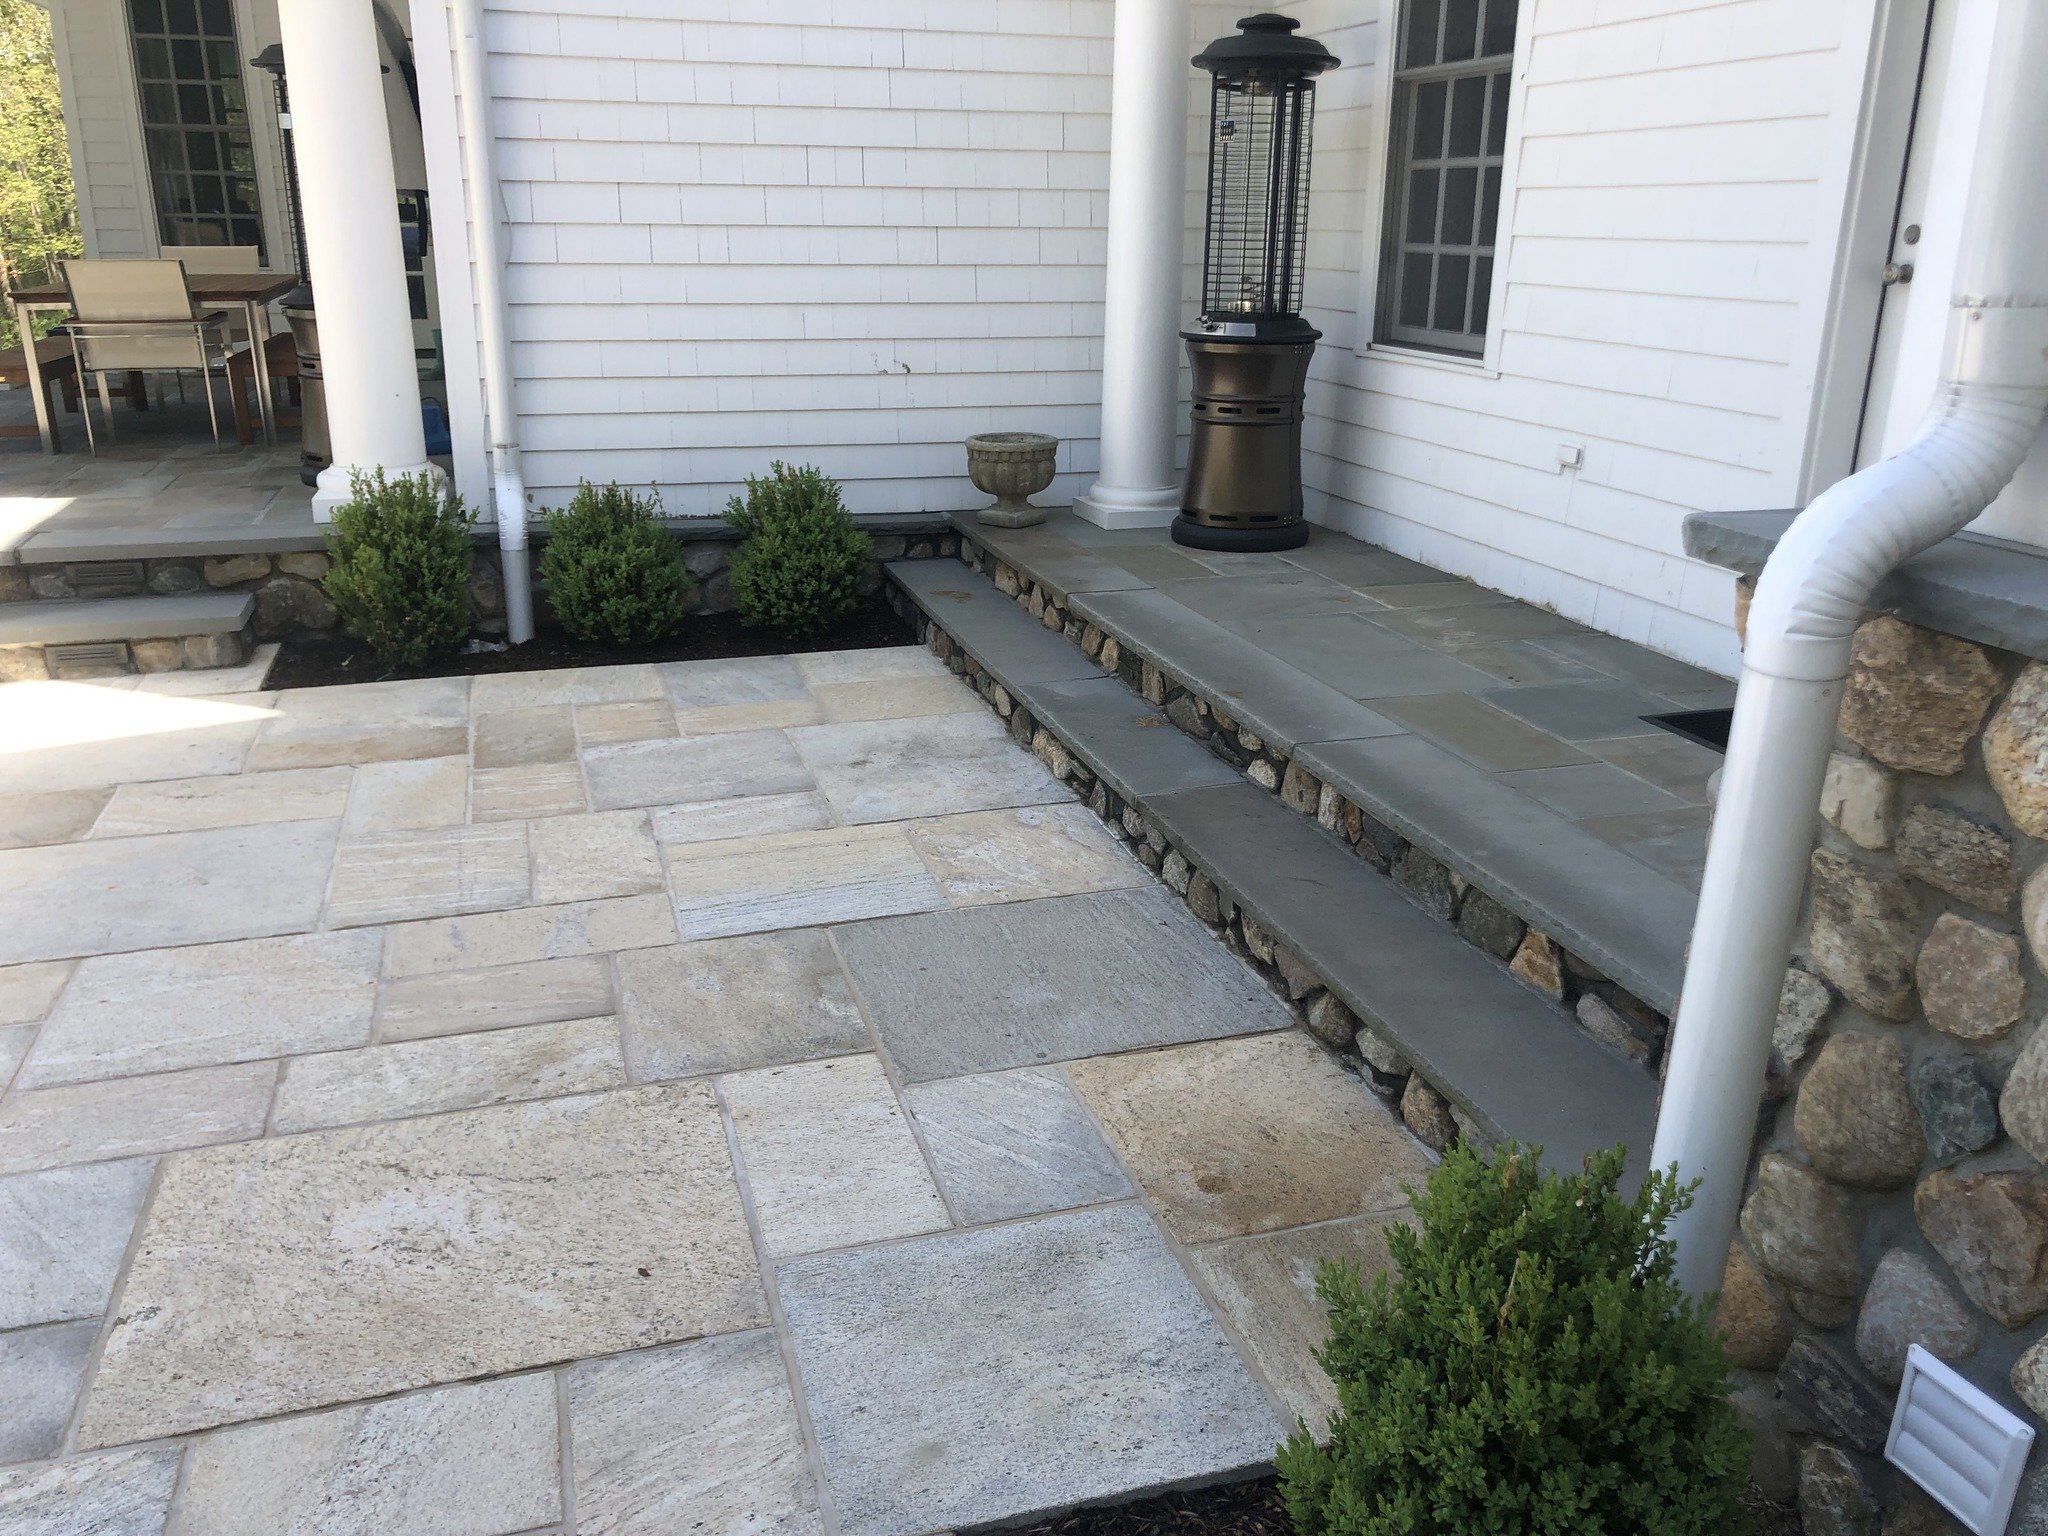 Timeless, beautiful and durable. Natural stone is a great choice for any patio, whether it&rsquo;s in a traditional or a contemporary landscape.
&bull;
#fairfieldcountyct #ridgefieldct #weschestercounty #patio #outdoorliving #homestyle #patiogoals #p